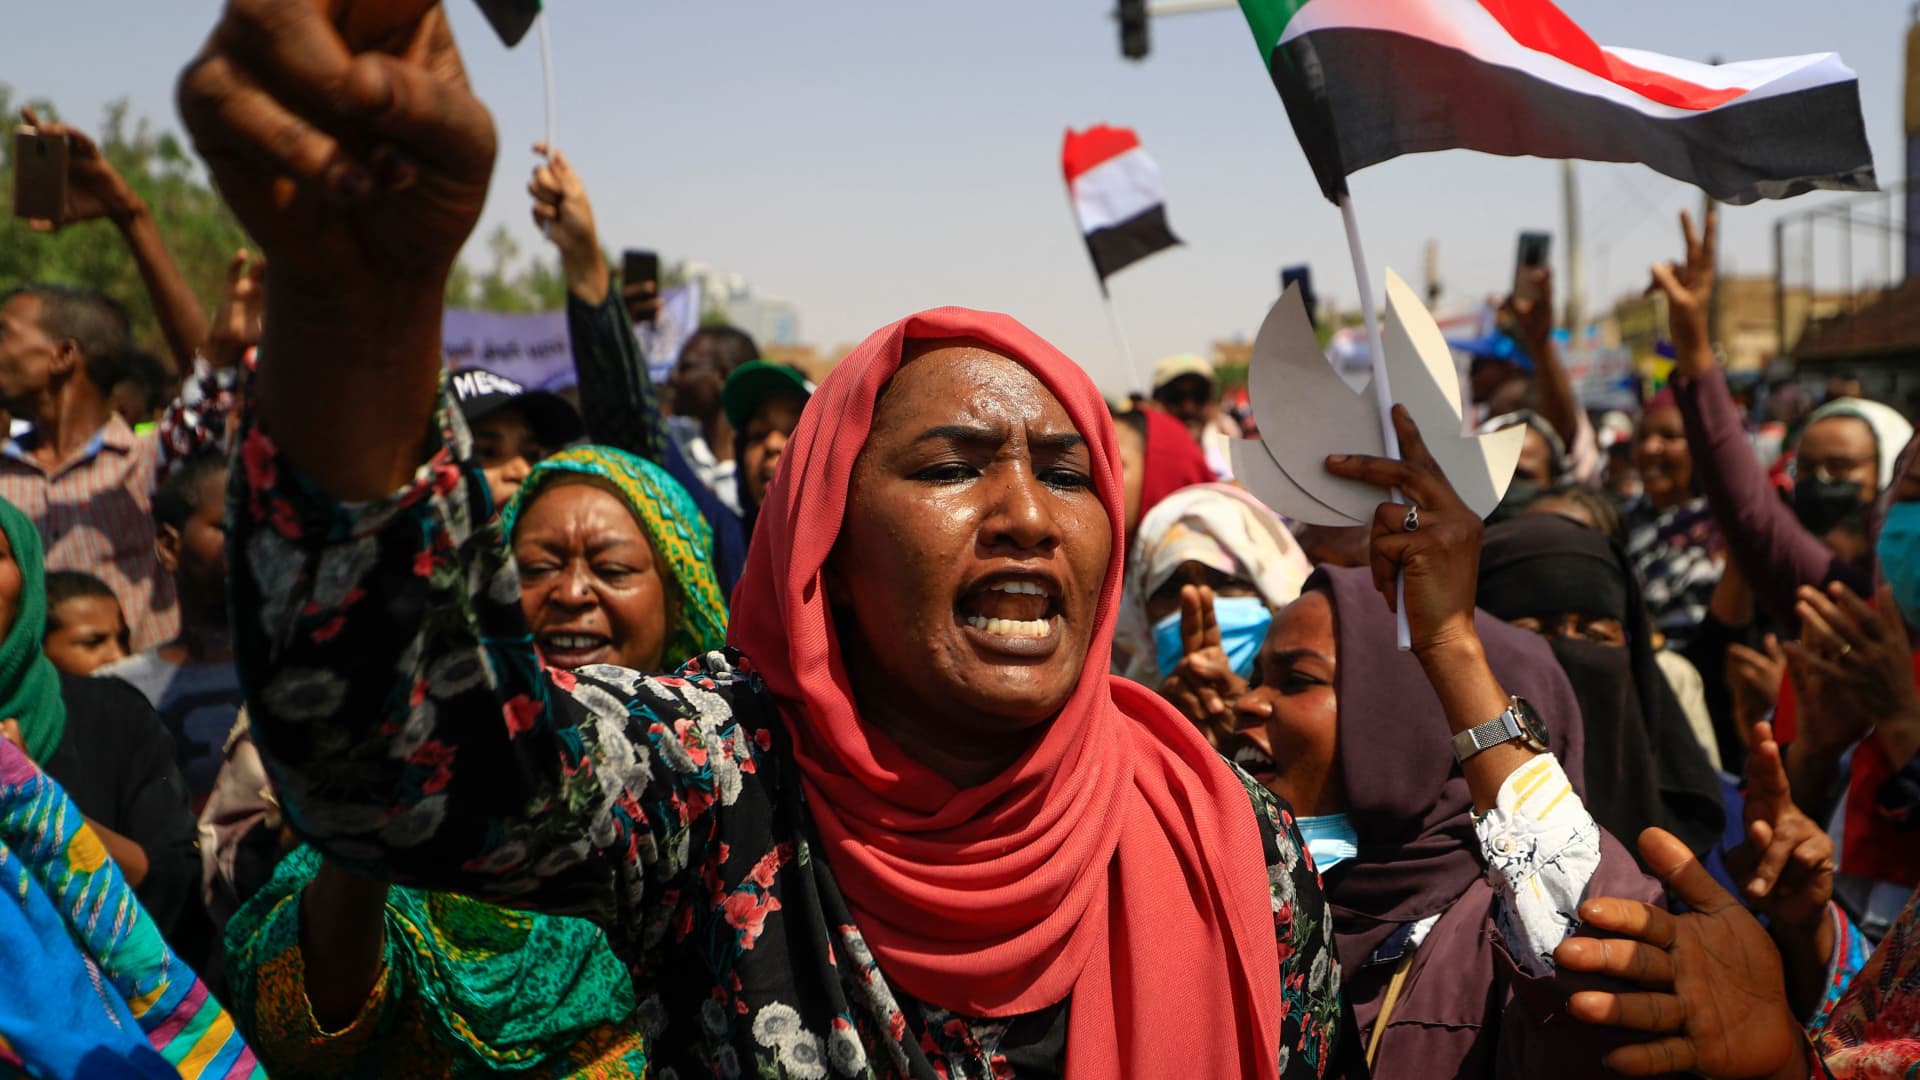 KHARTOUM, Sudan - Sudanese demonstrators take to the streets of the capital Khartoum to demand the government's transition to civilian rule, on October 21, 2021.